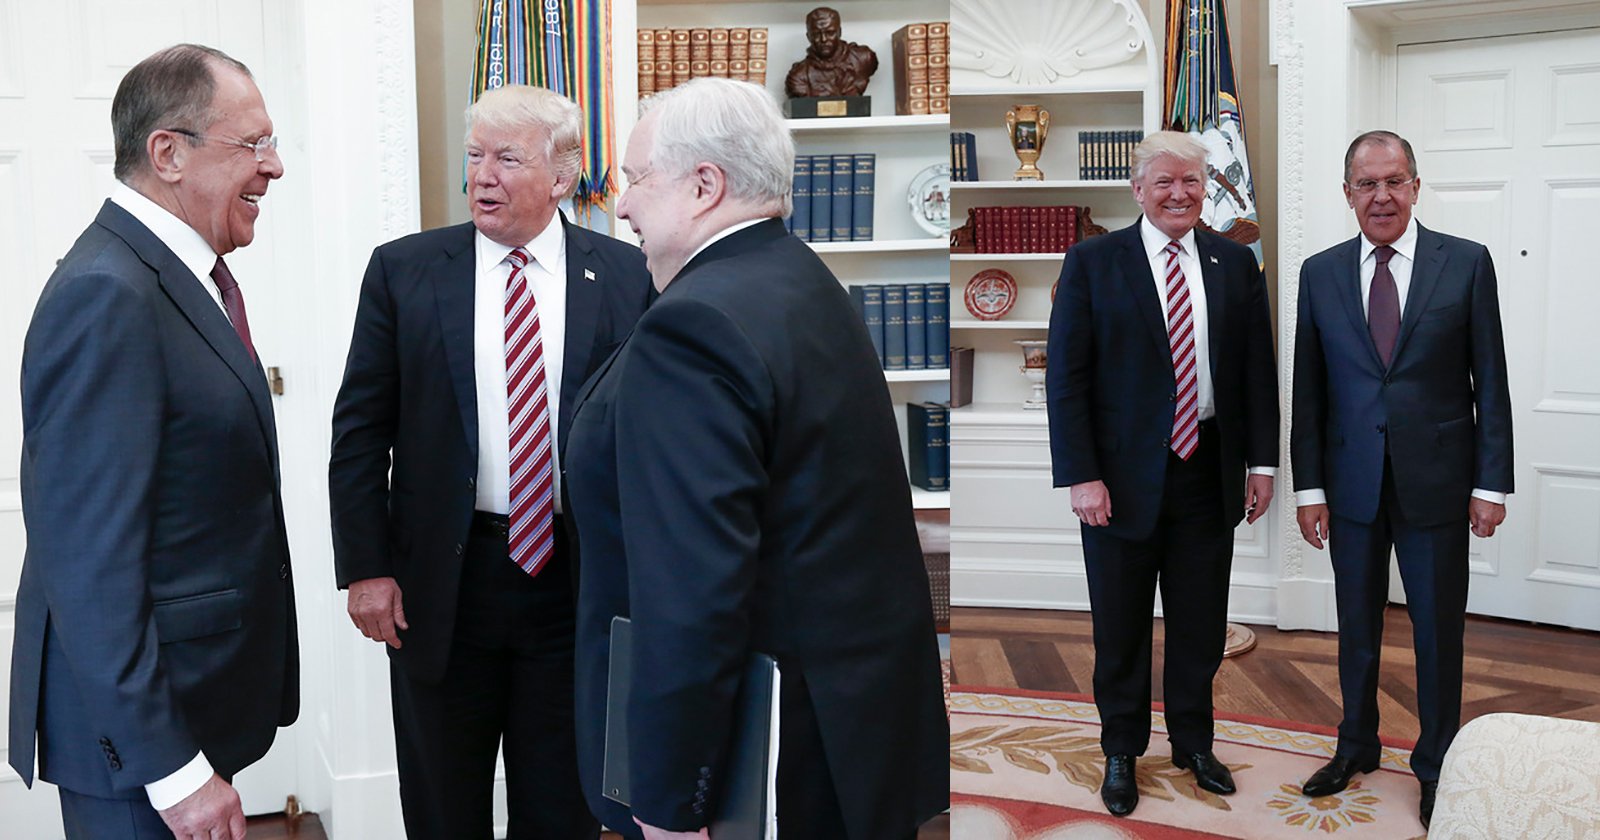 Russian Photographer in Oval Office Raises Red Flags, US Media Locked Out